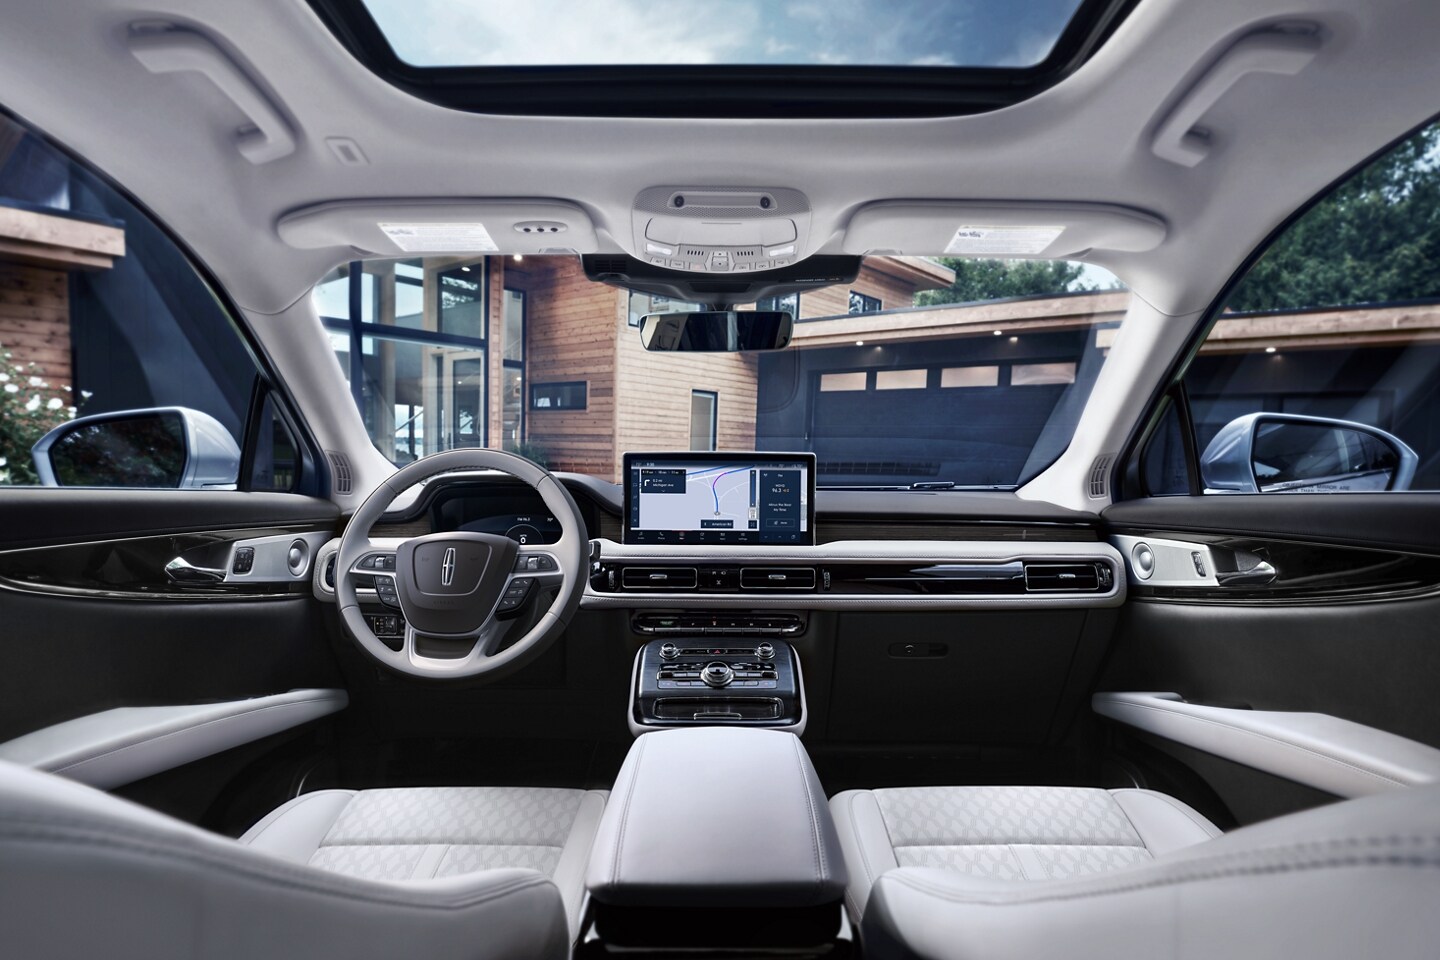 The 2023 Lincoln Nautilus® SUV shows off the dashboard and front cabin with a broad center touchscreen